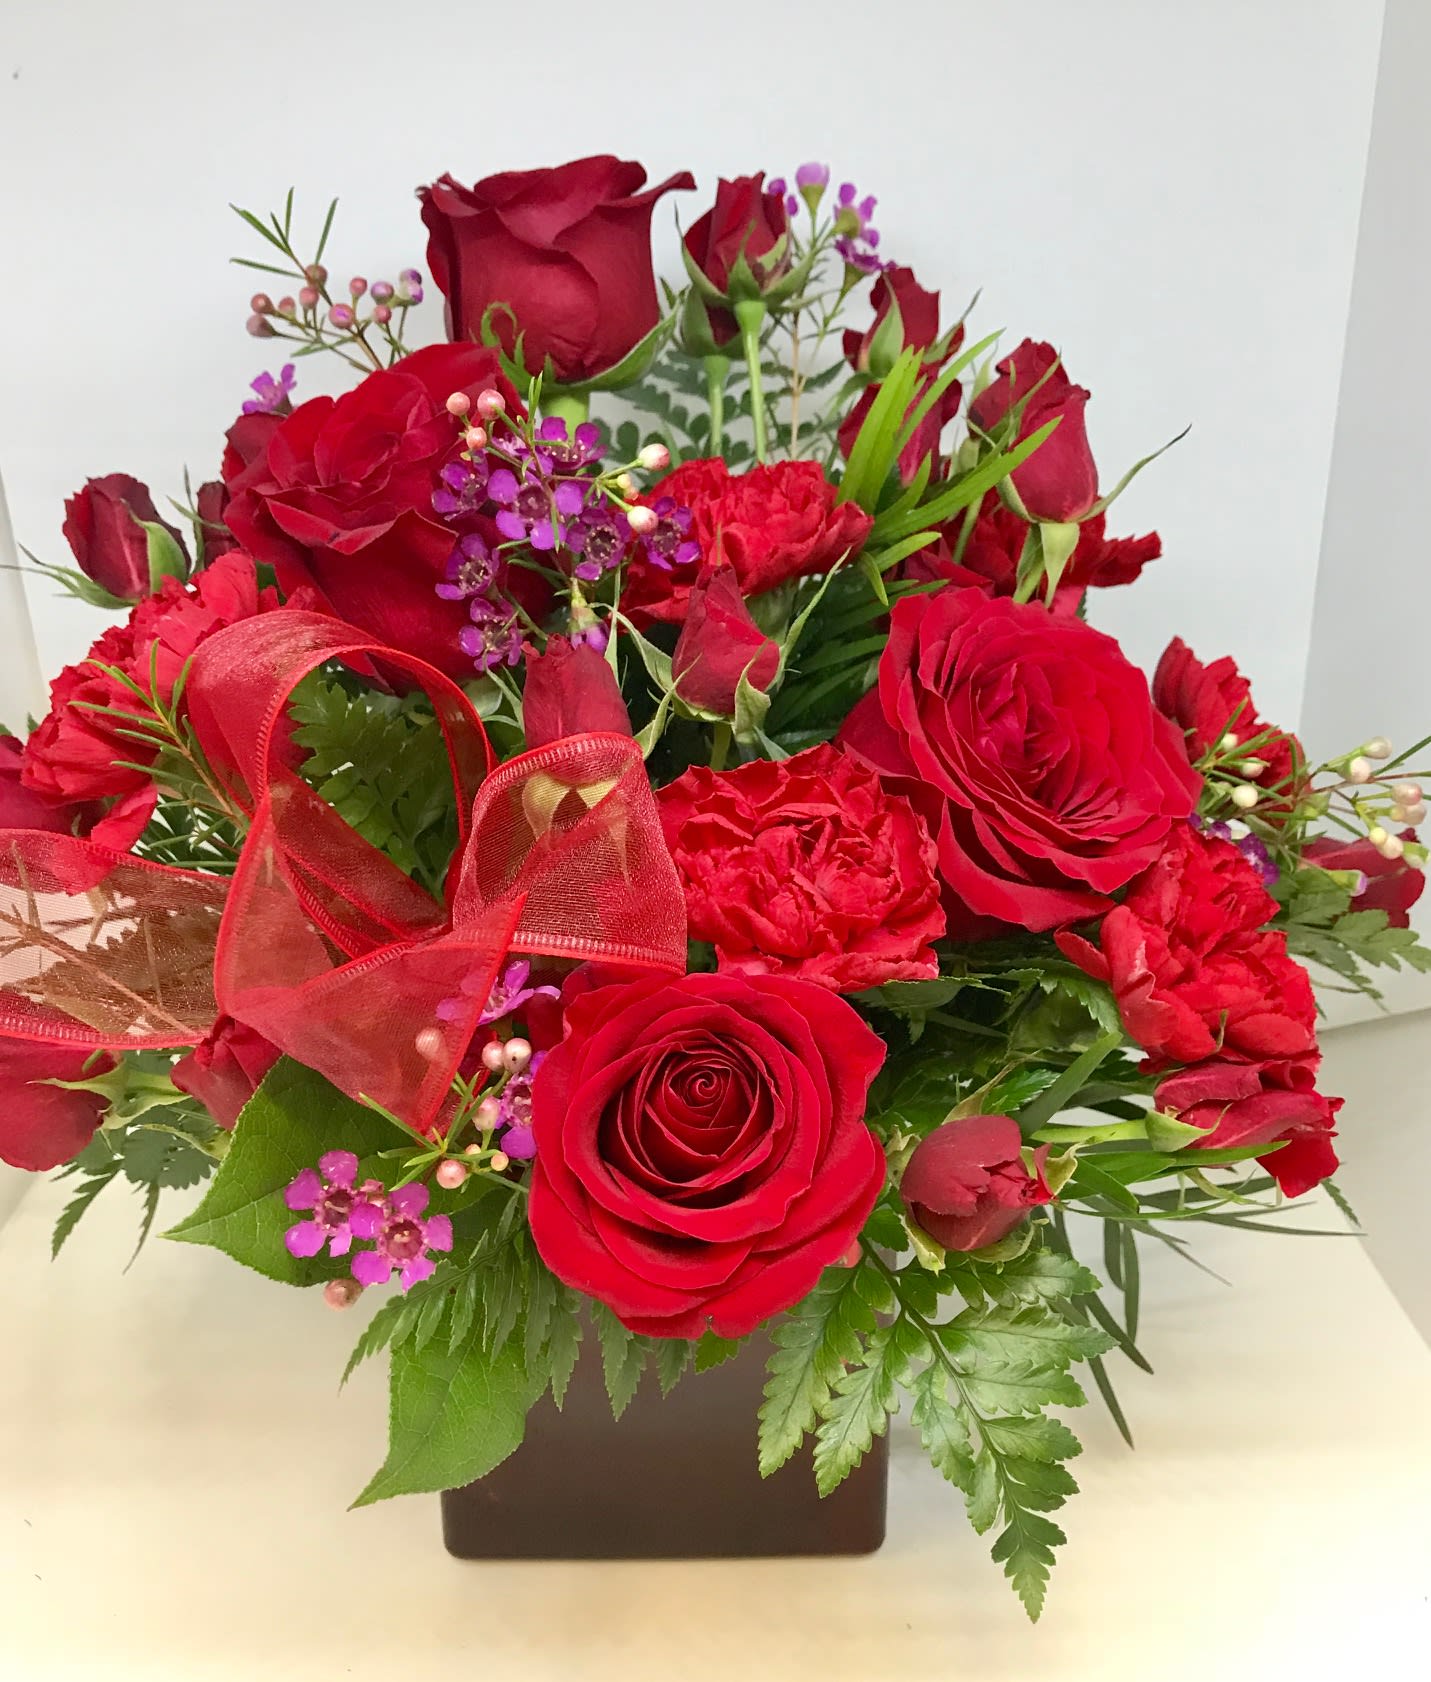 Christmas Flowers for Delivery with Red Cardinal Accent – Petal Street  Flower Company